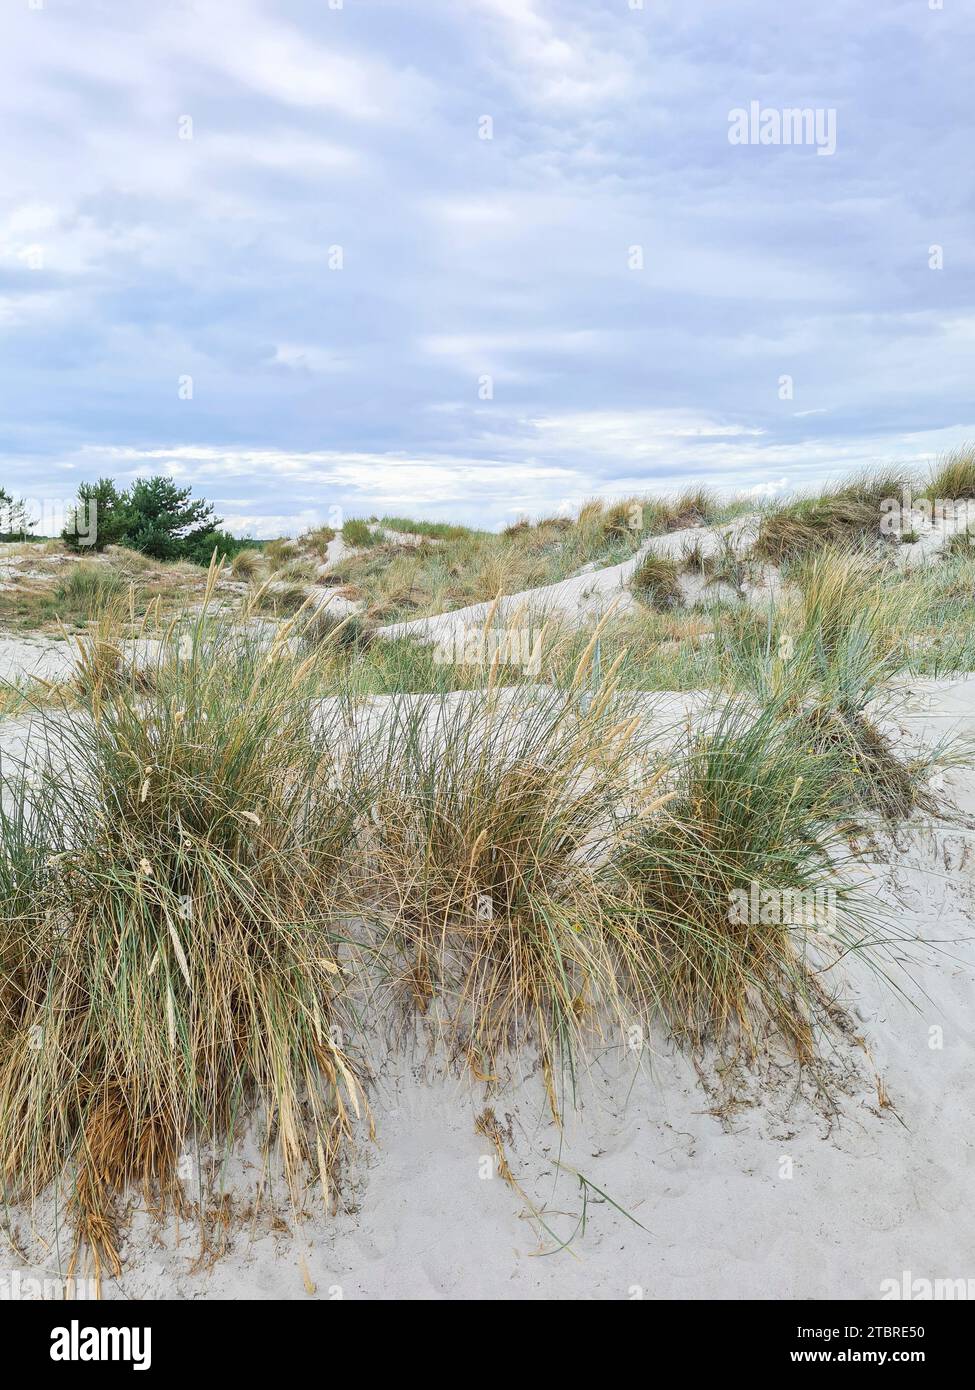 Germany, Mecklenburg-Western Pomerania, peninsula Fischland-Darß-Zingst, fine sandy beach with dune grass at the beach crossing in Prerow Stock Photo